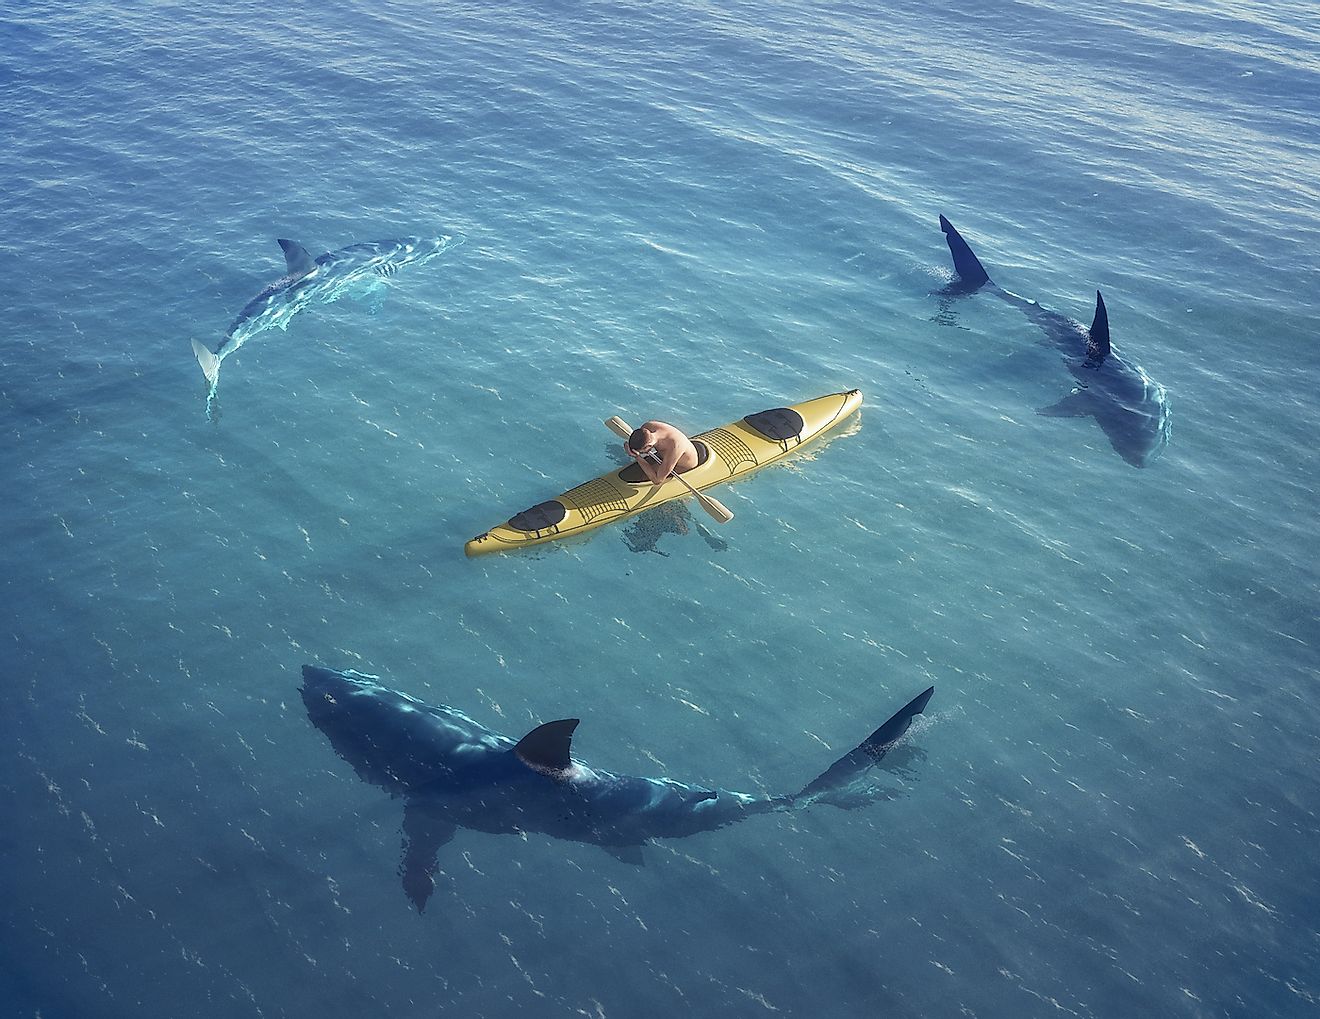 A kayaker surrounded by sharks. Image credit: Musicman/Shutterstock.com